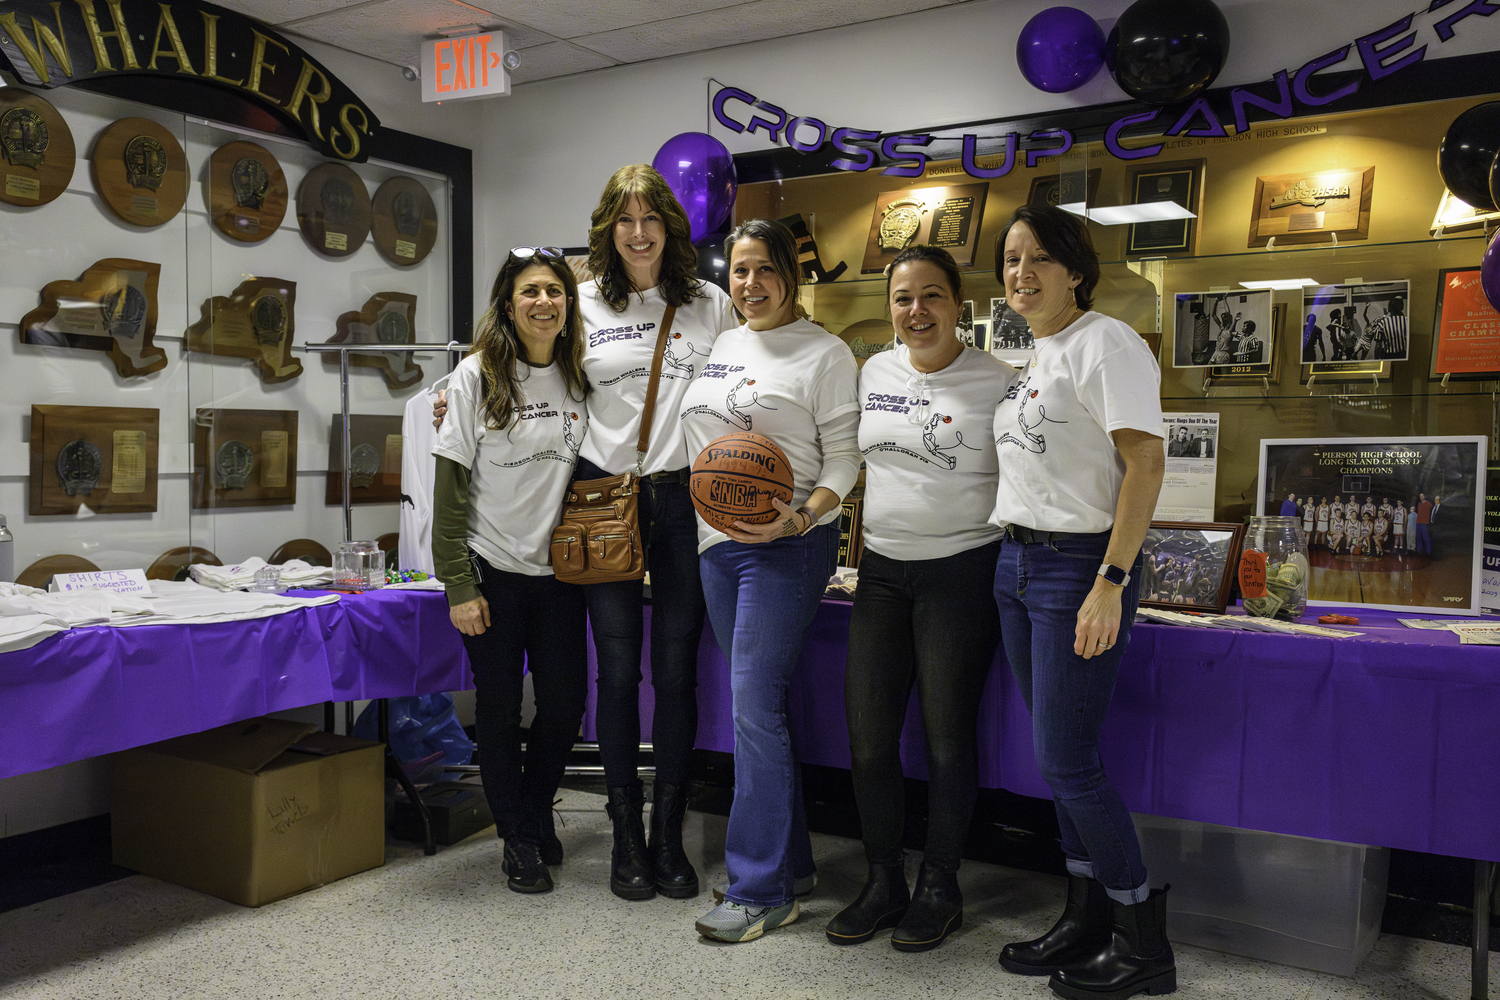 The group who helped organize Friday night's Cross Up Cancer event included, from left, Donna Butler, Deirdre Seltzer, Laura Smith, Janet Mancino and Karin Schroeder.   MARIANNE BARNETT